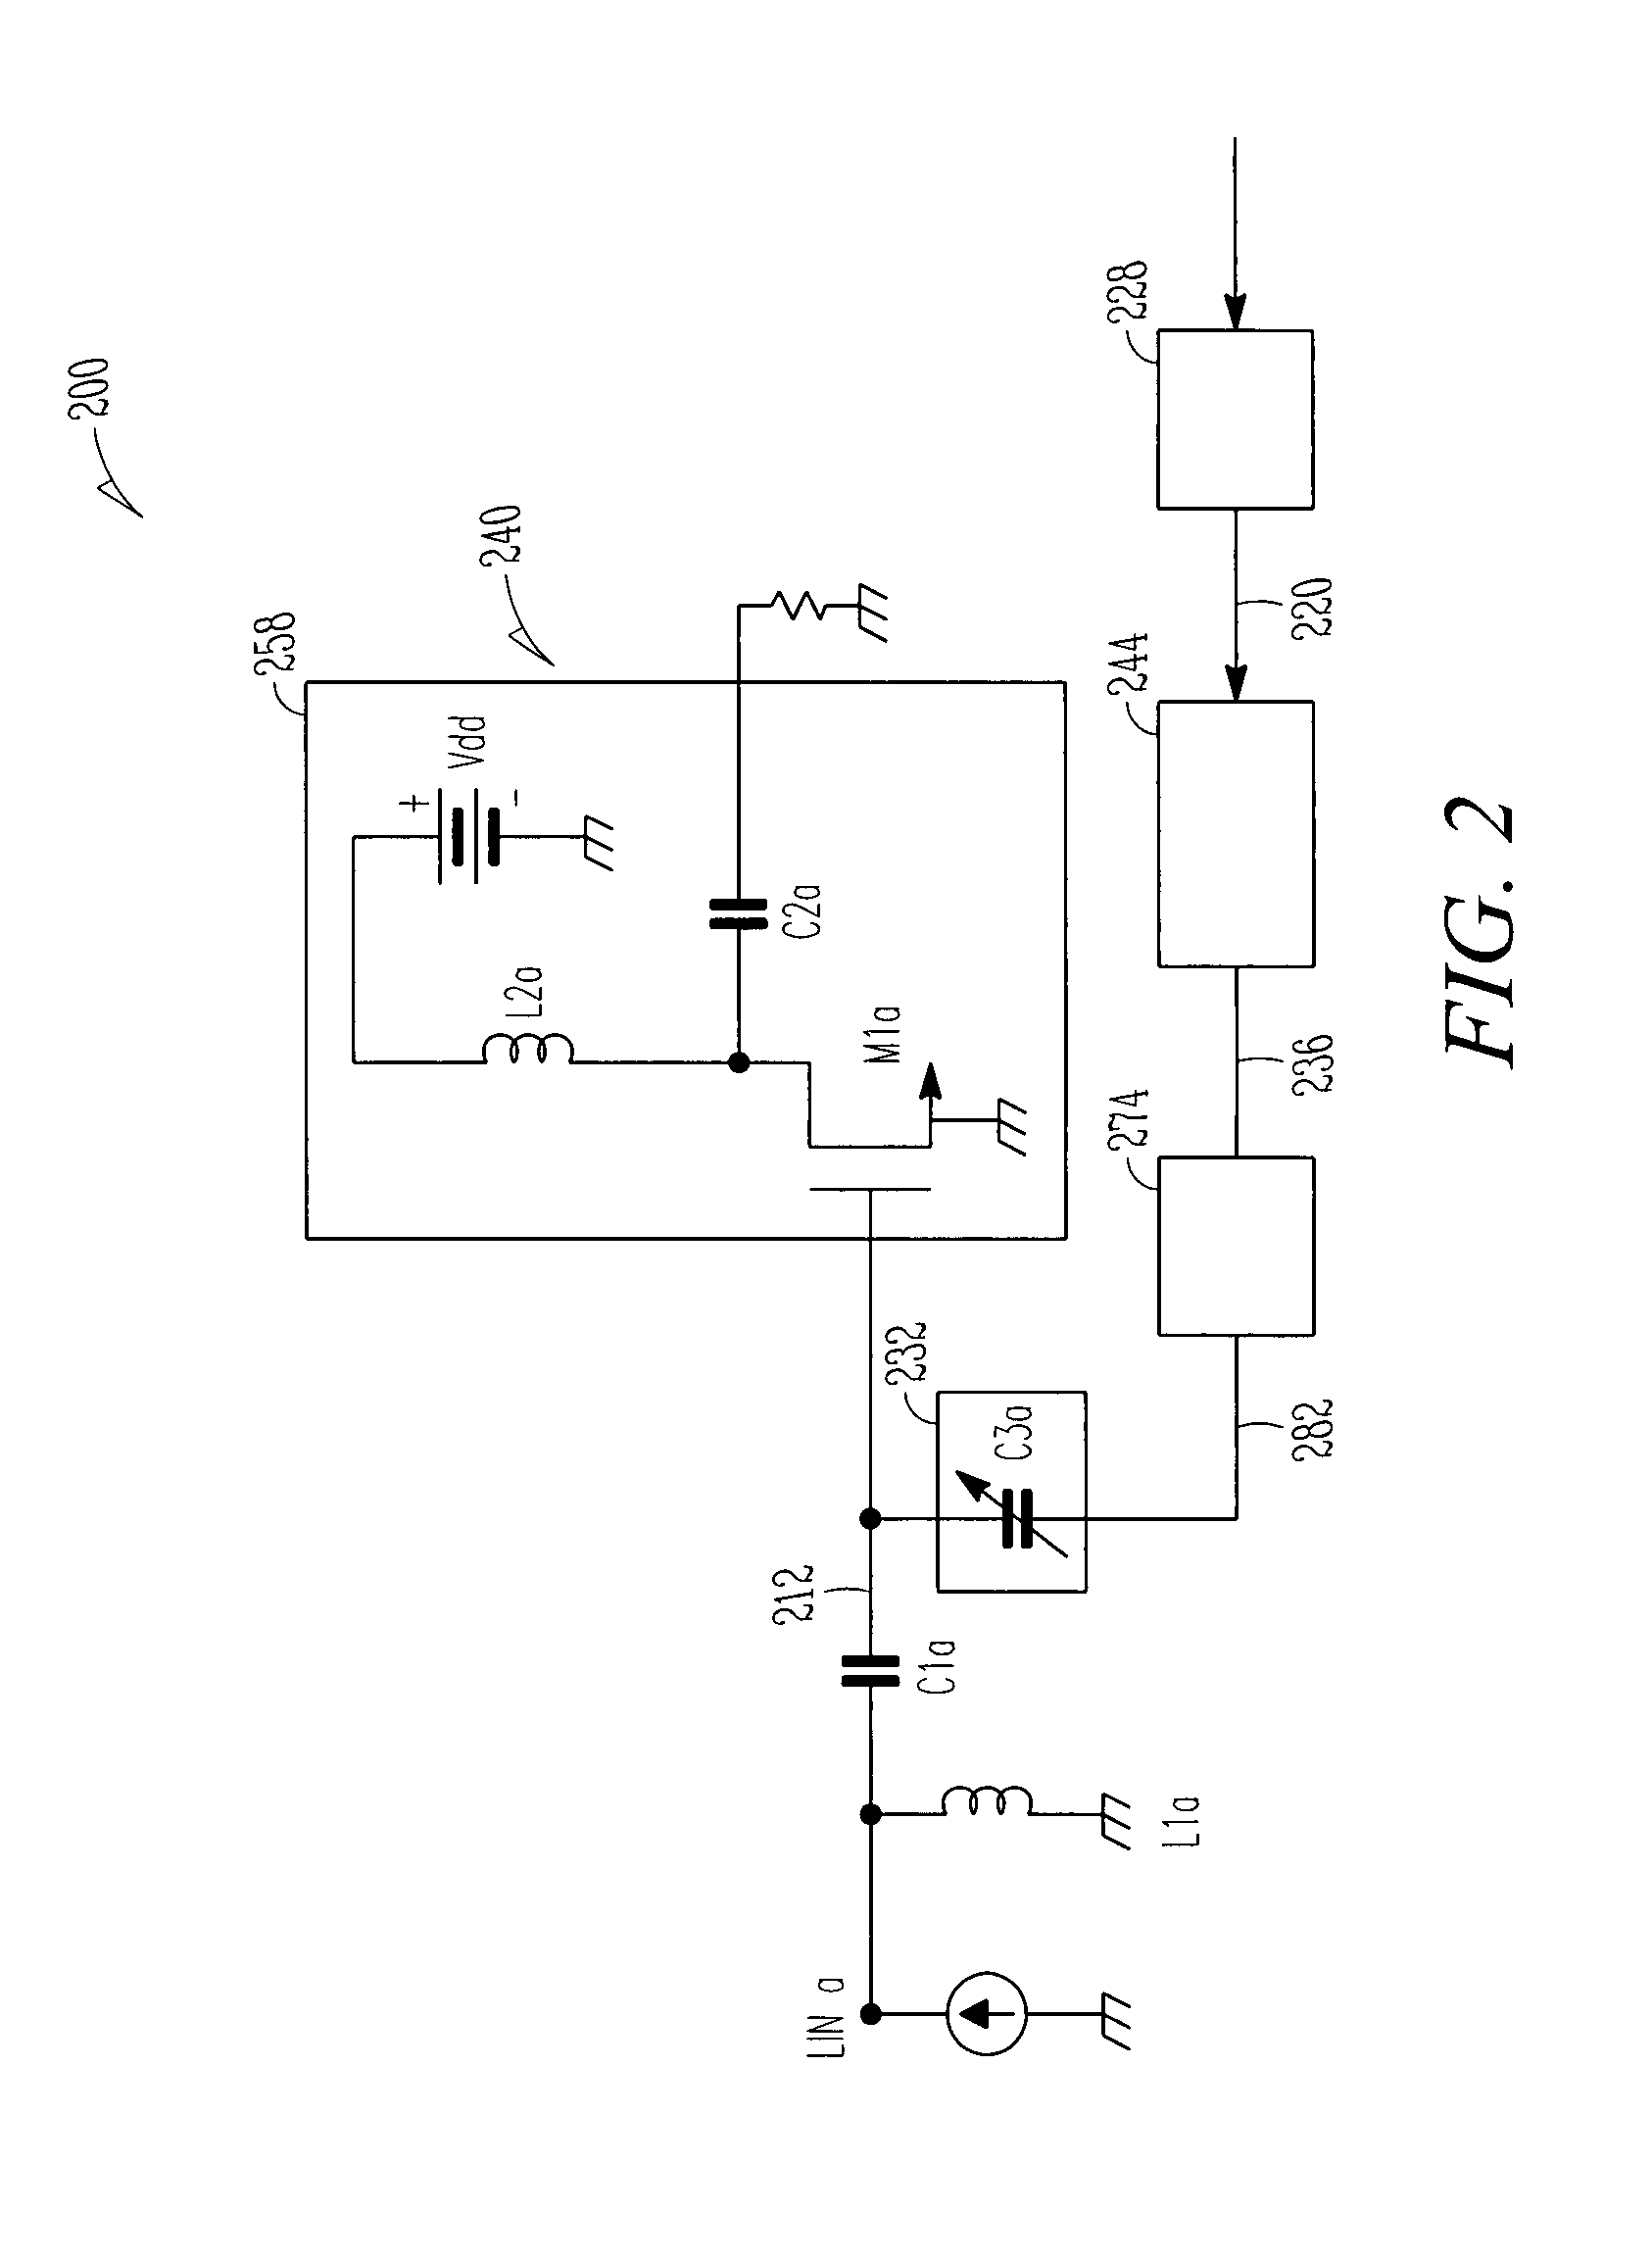 Amplifier distortion management apparatus, systems, and methods